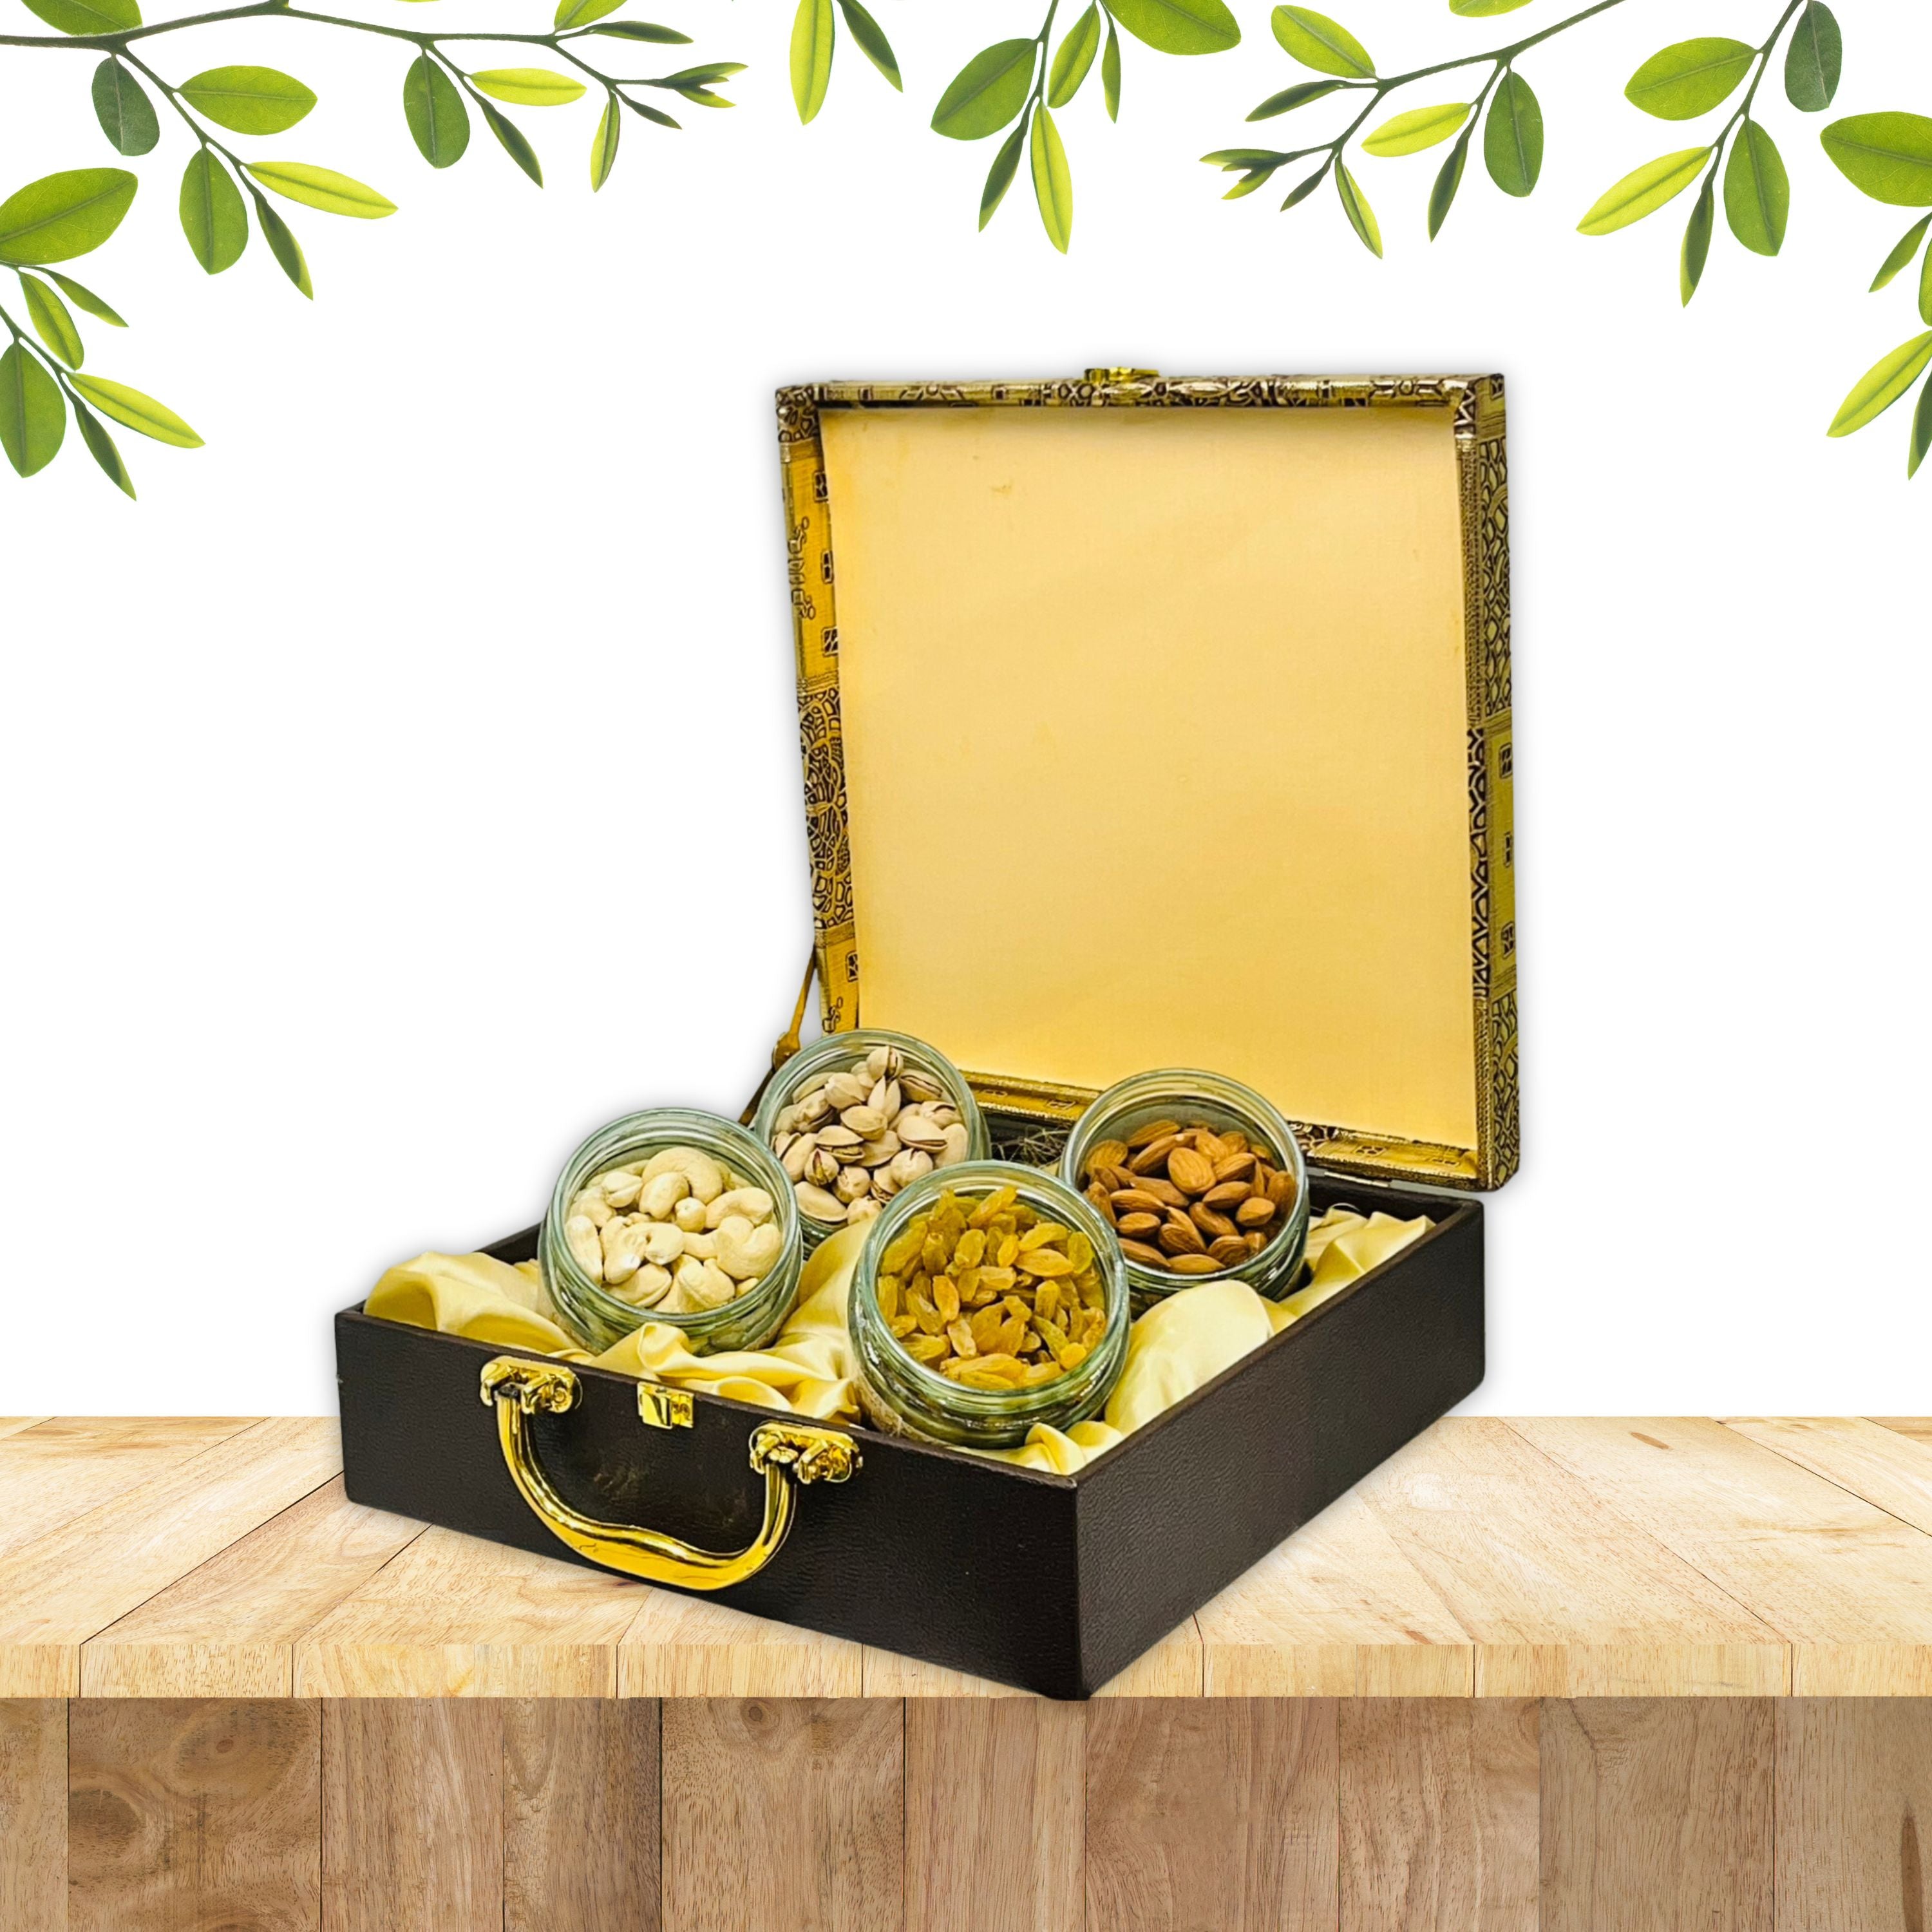 Gift Hamper with 4 Premium Dry Fruits in a Jar